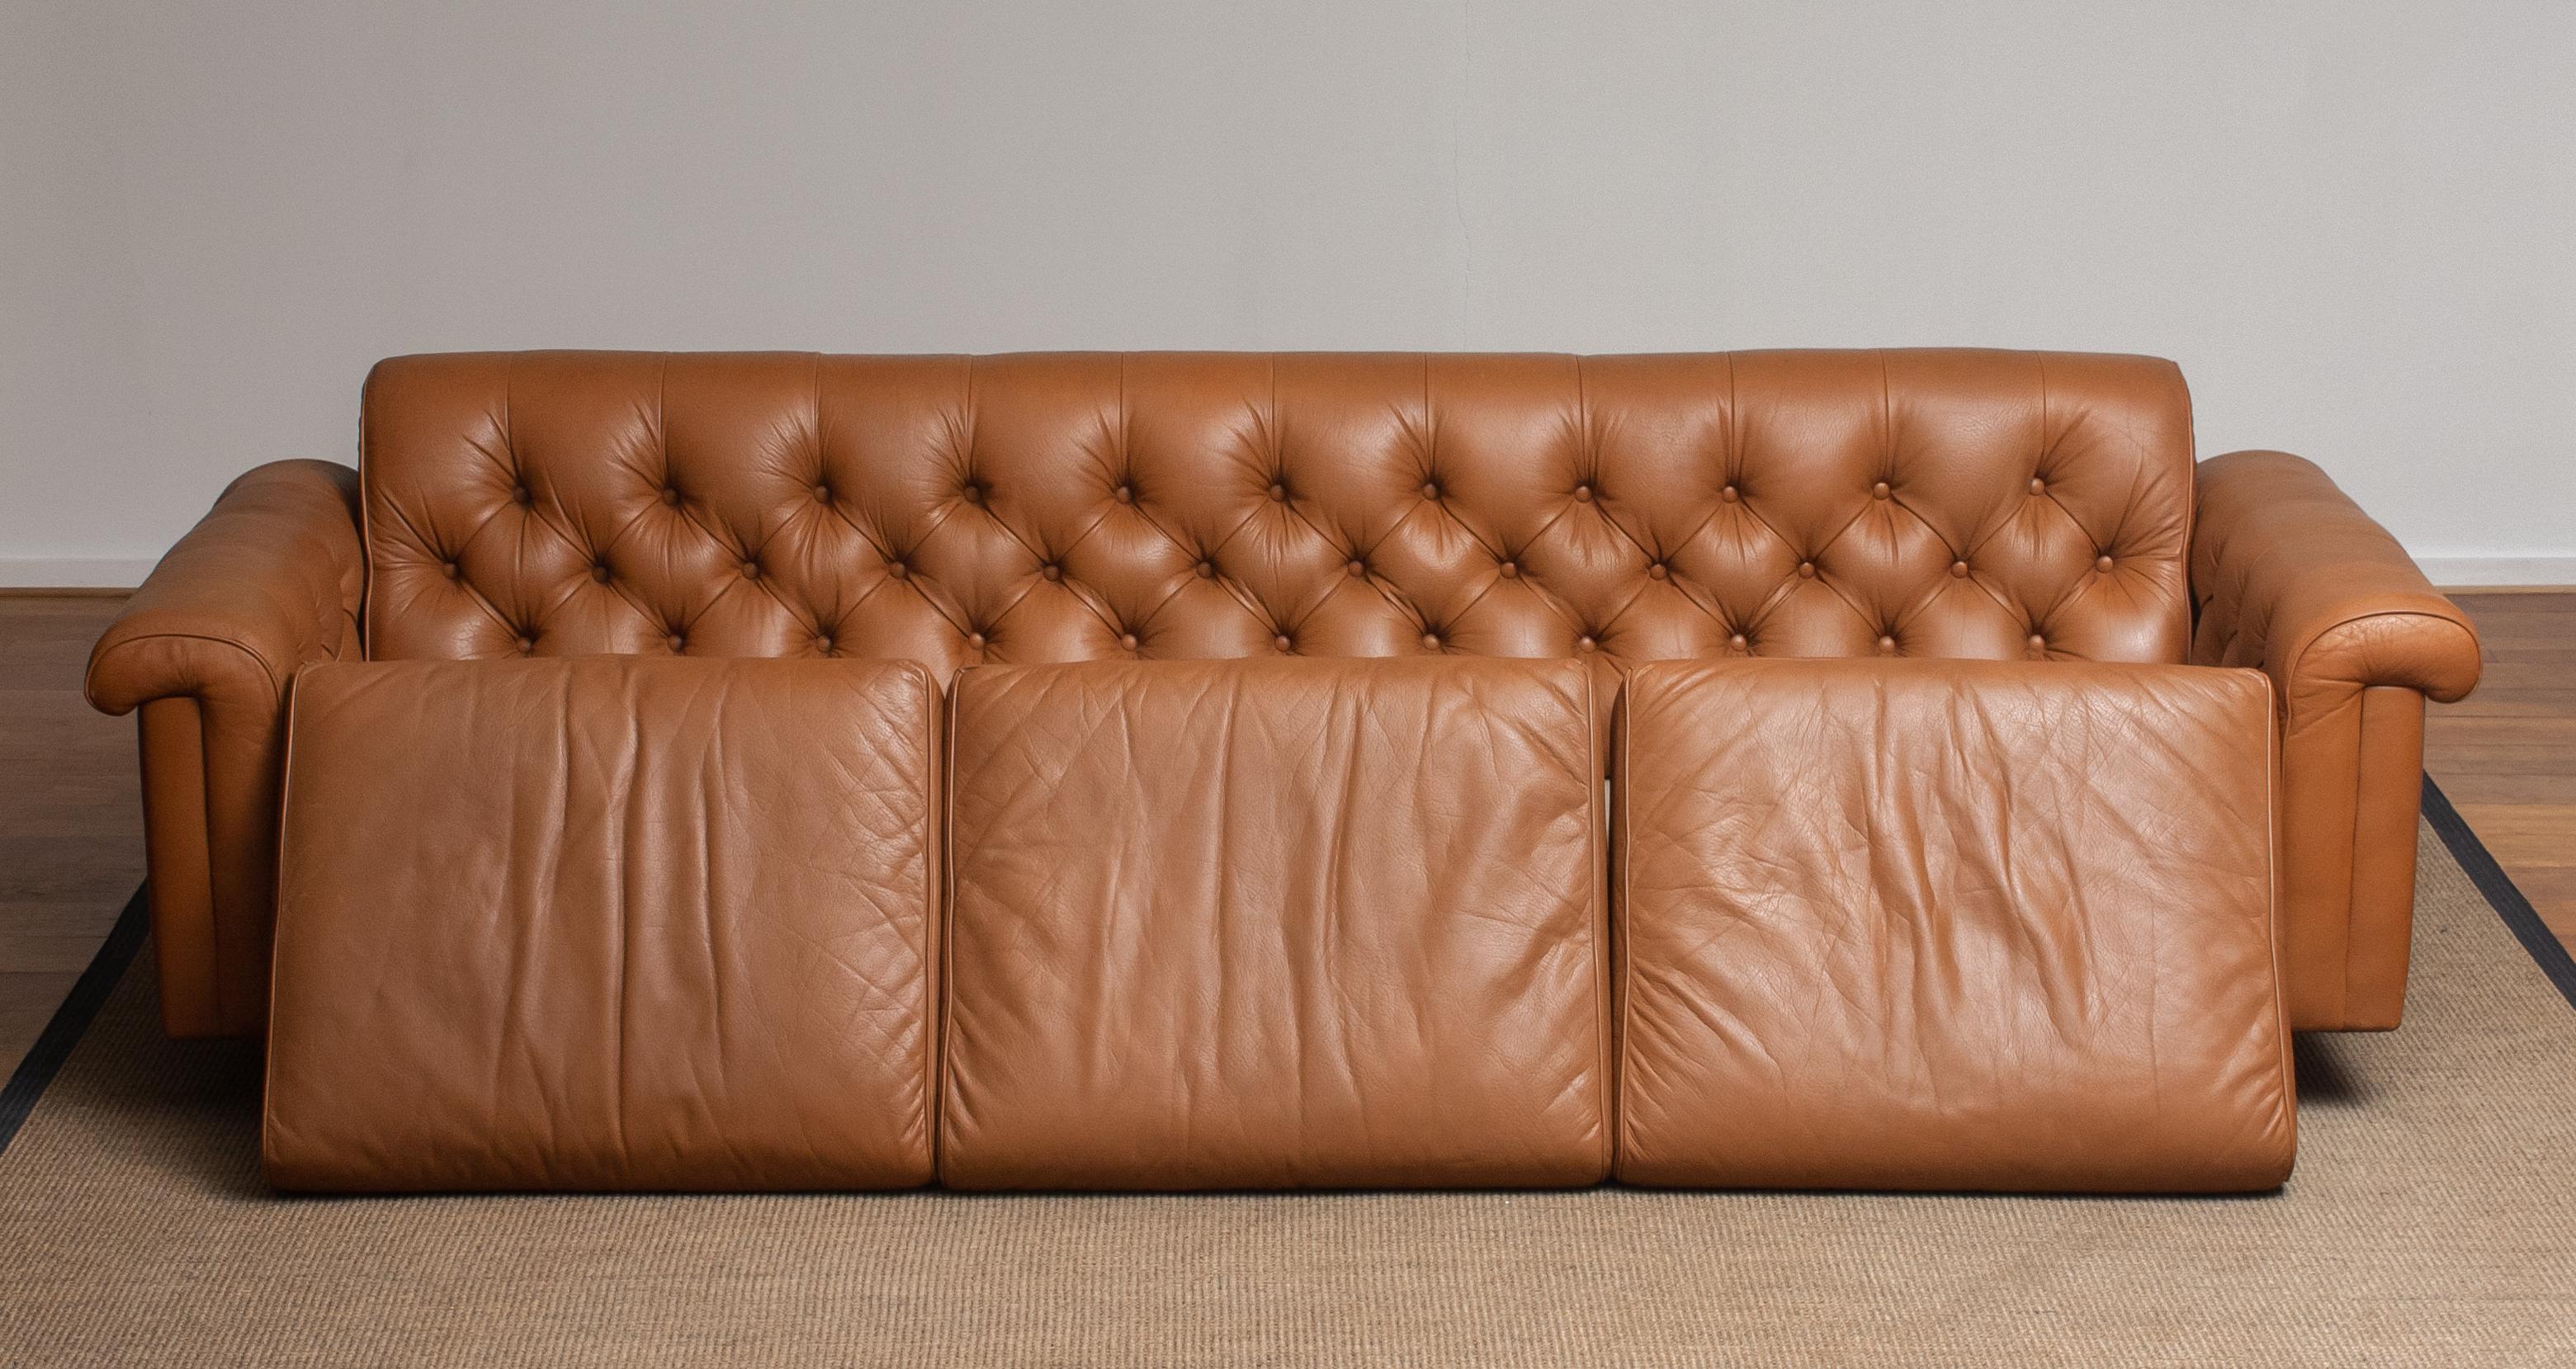 Late 20th Century 1970's Sofa by Karl Erik Ekselius for JOC Design in Camel Color Tufted Leather